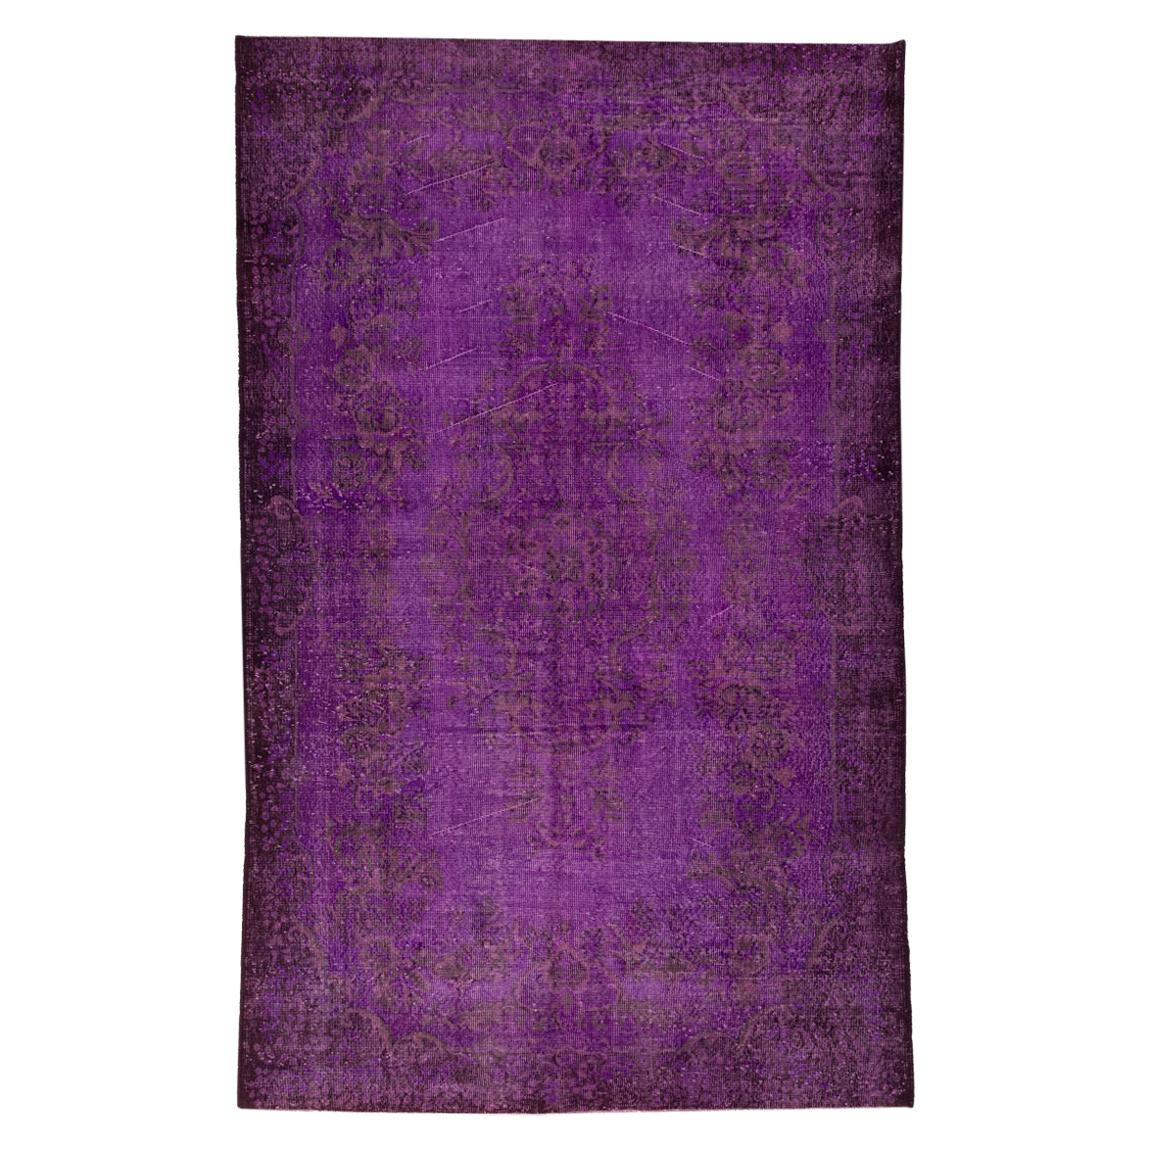 6.2x10 Ft Vintage Handmade Turkish Wool Area Rug Over-dyed in Purple